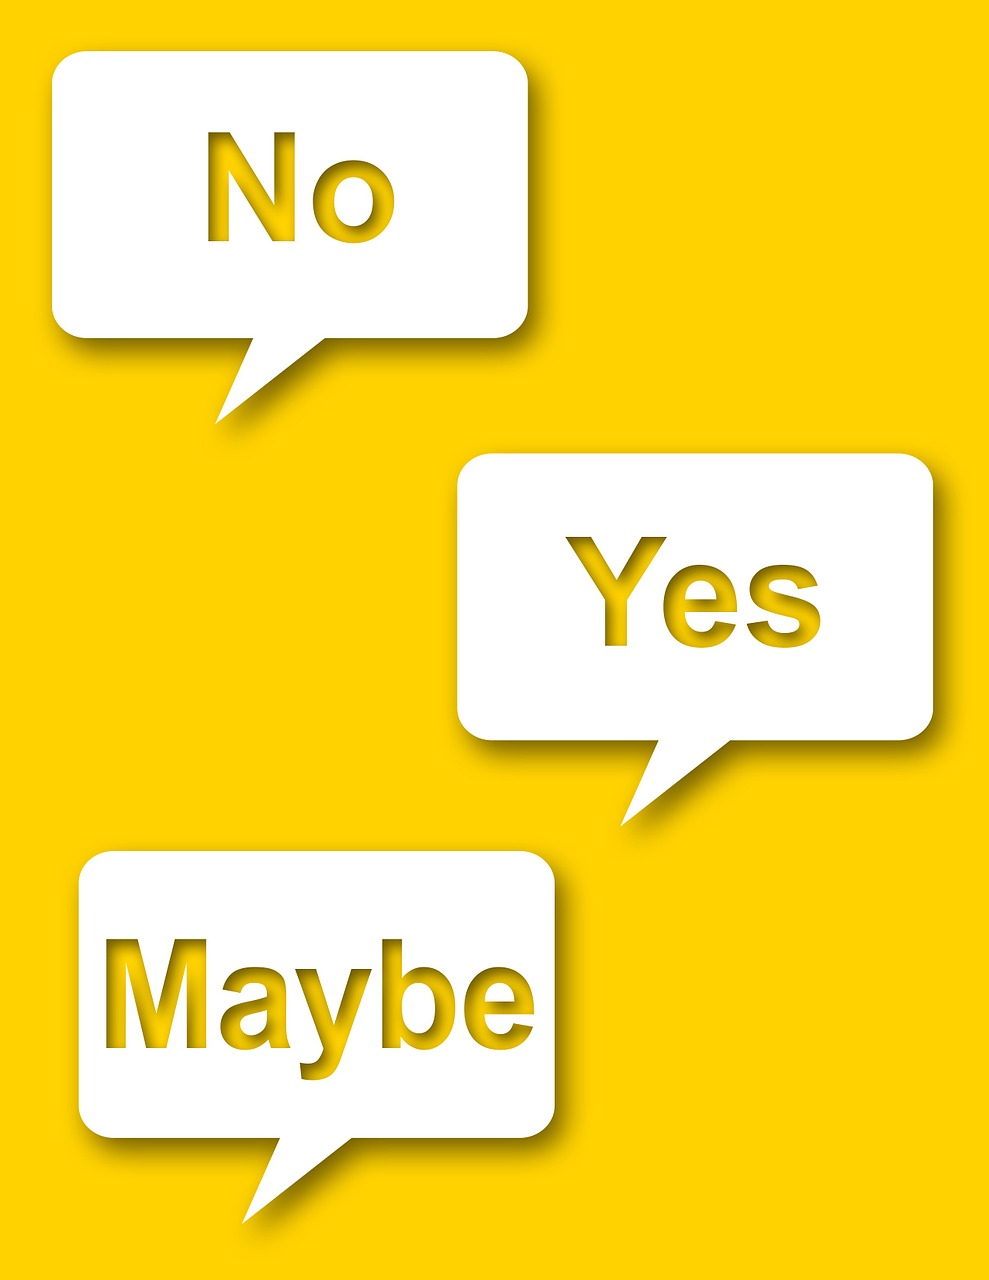 Yes no maybe - Free communications icons